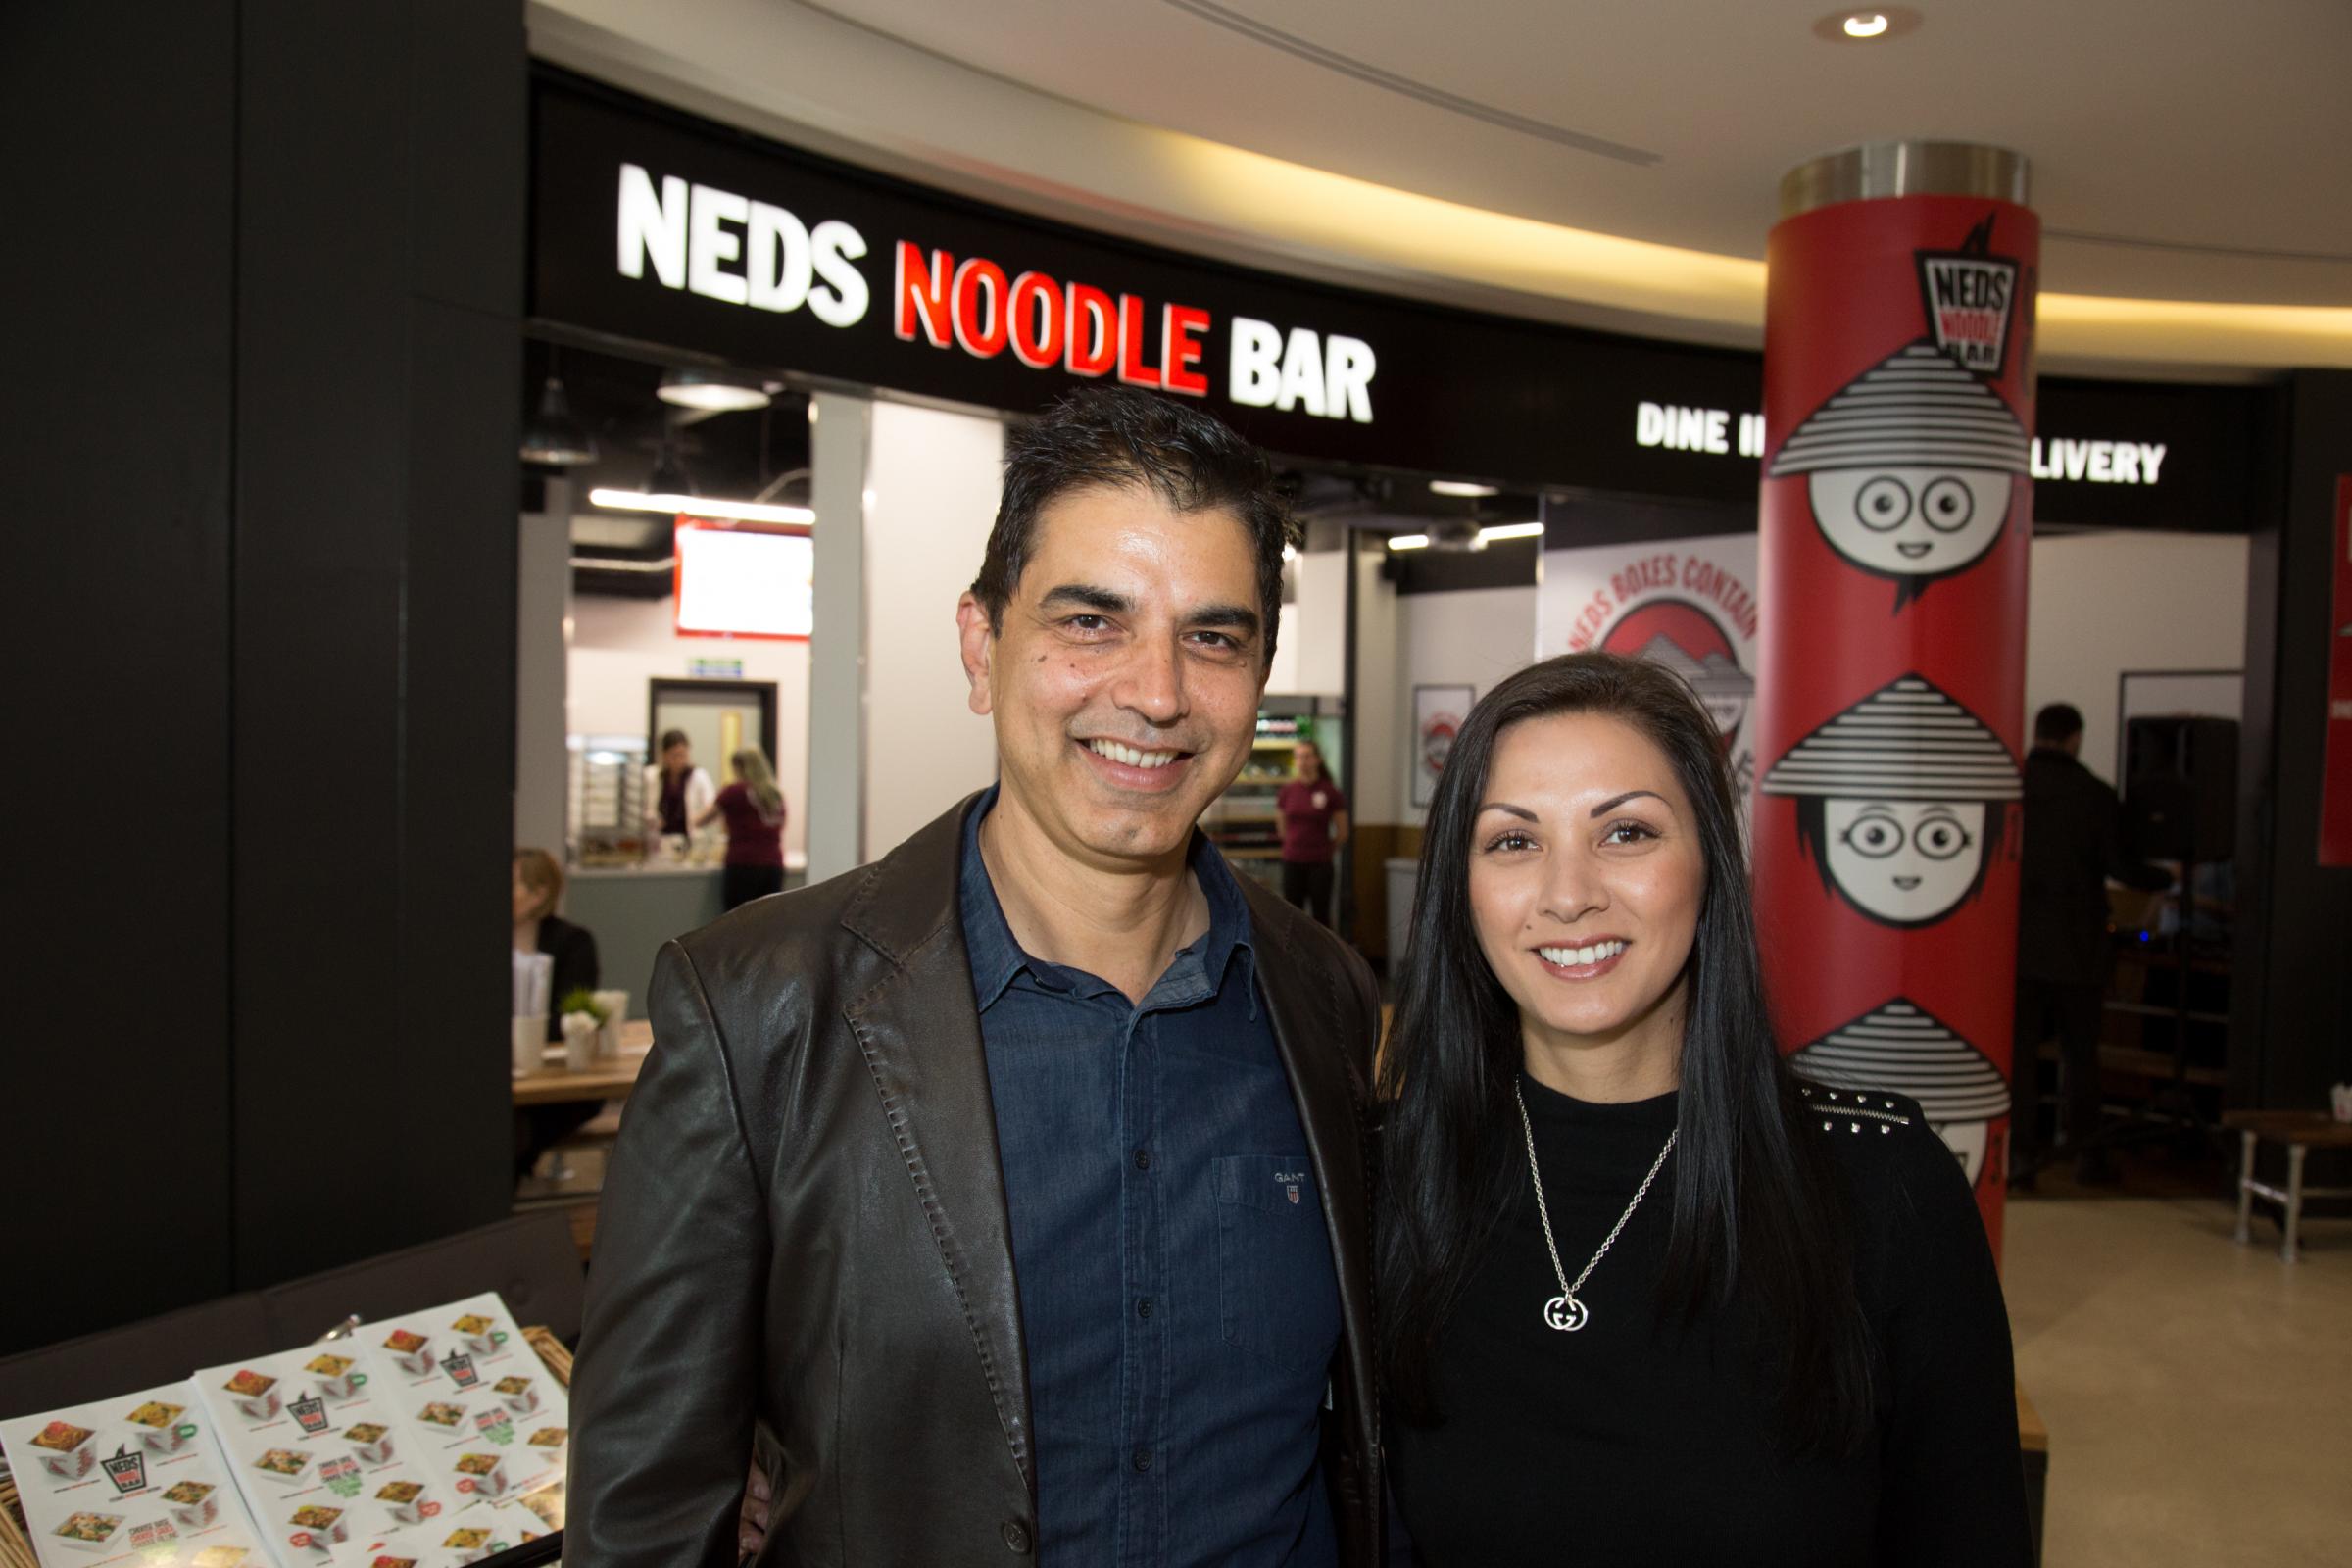 Neds Noodle Bar opens in Southamptons Marlands Shopping Centre. Farhat Abbas, Director of Development for Neds Noodle Bar with Nicky Witney..